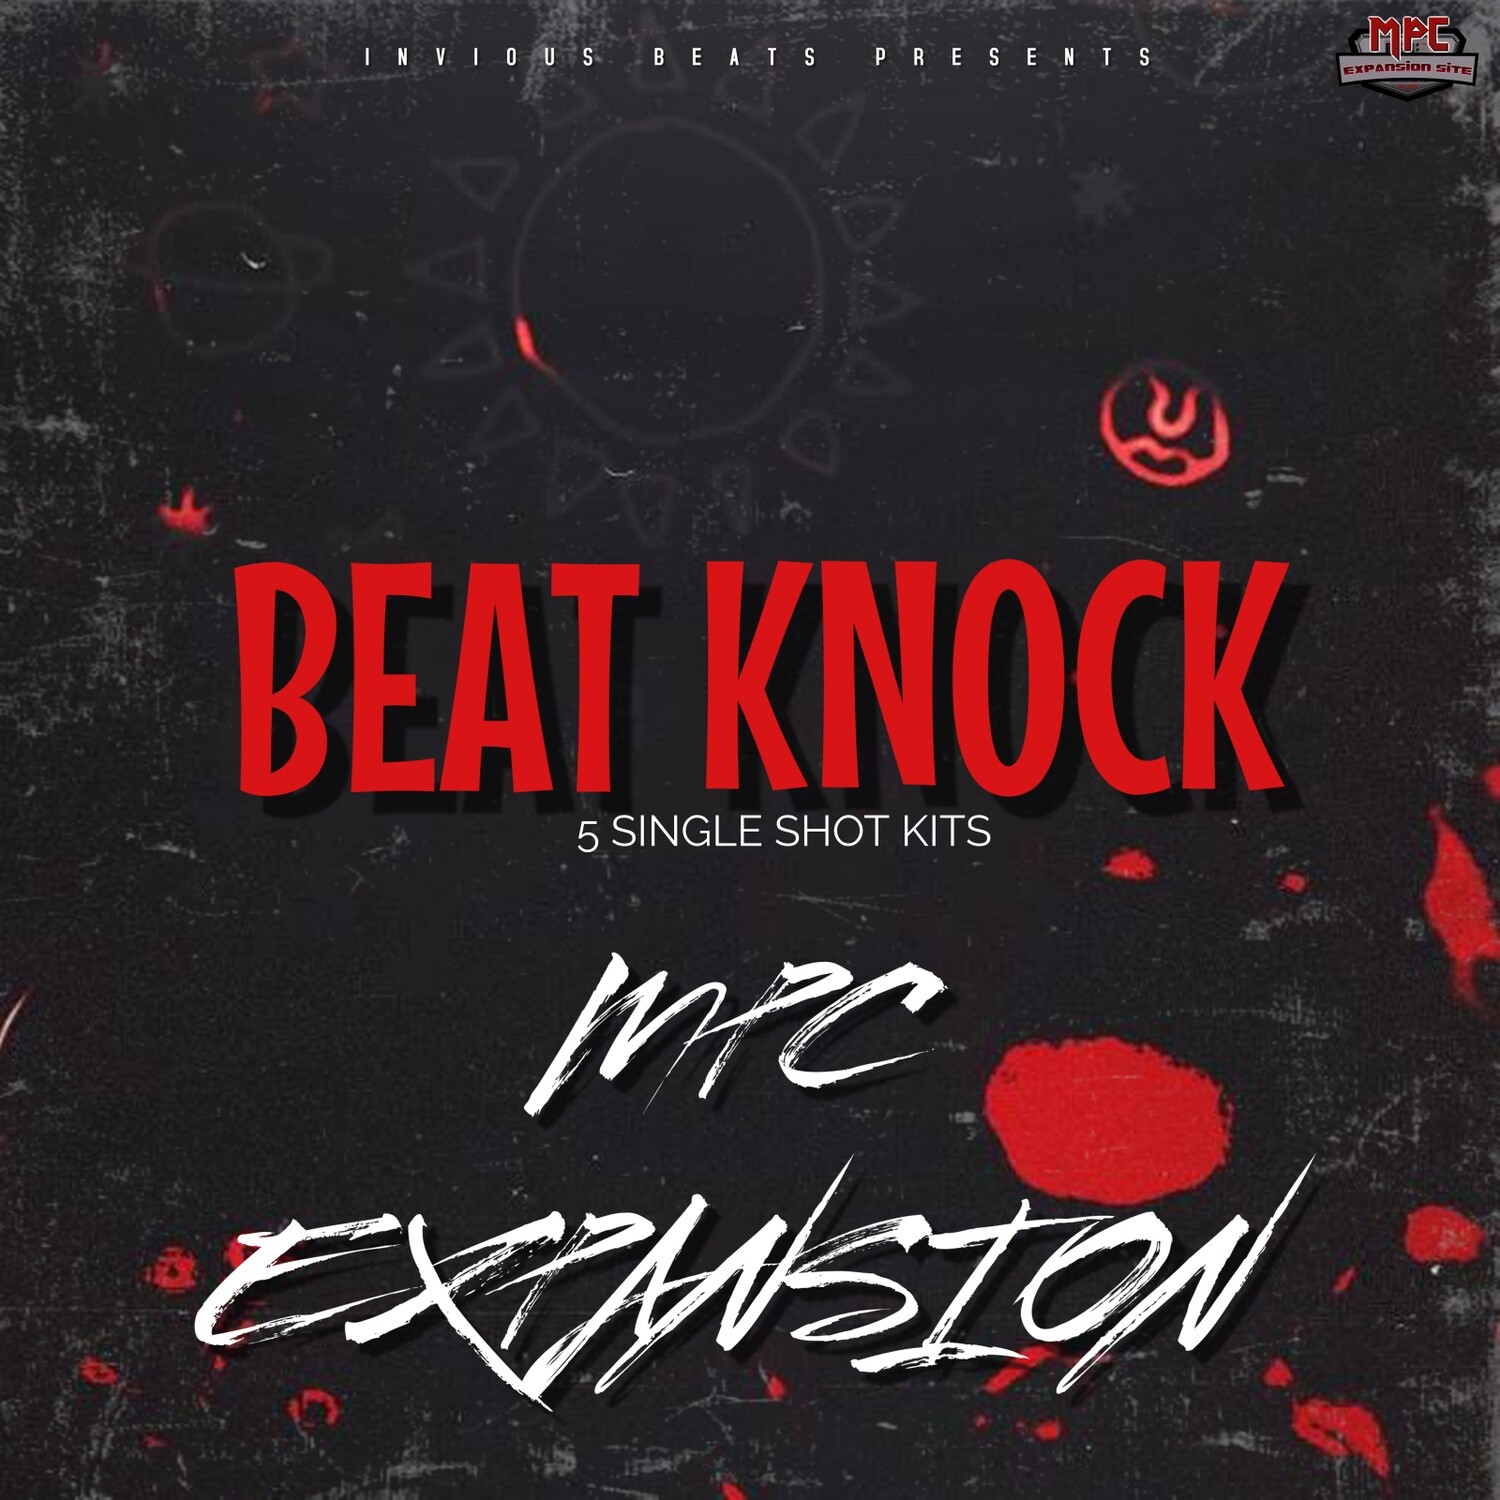 MPC EXPANSION 'BEAT KNOCK' by INVIOUS